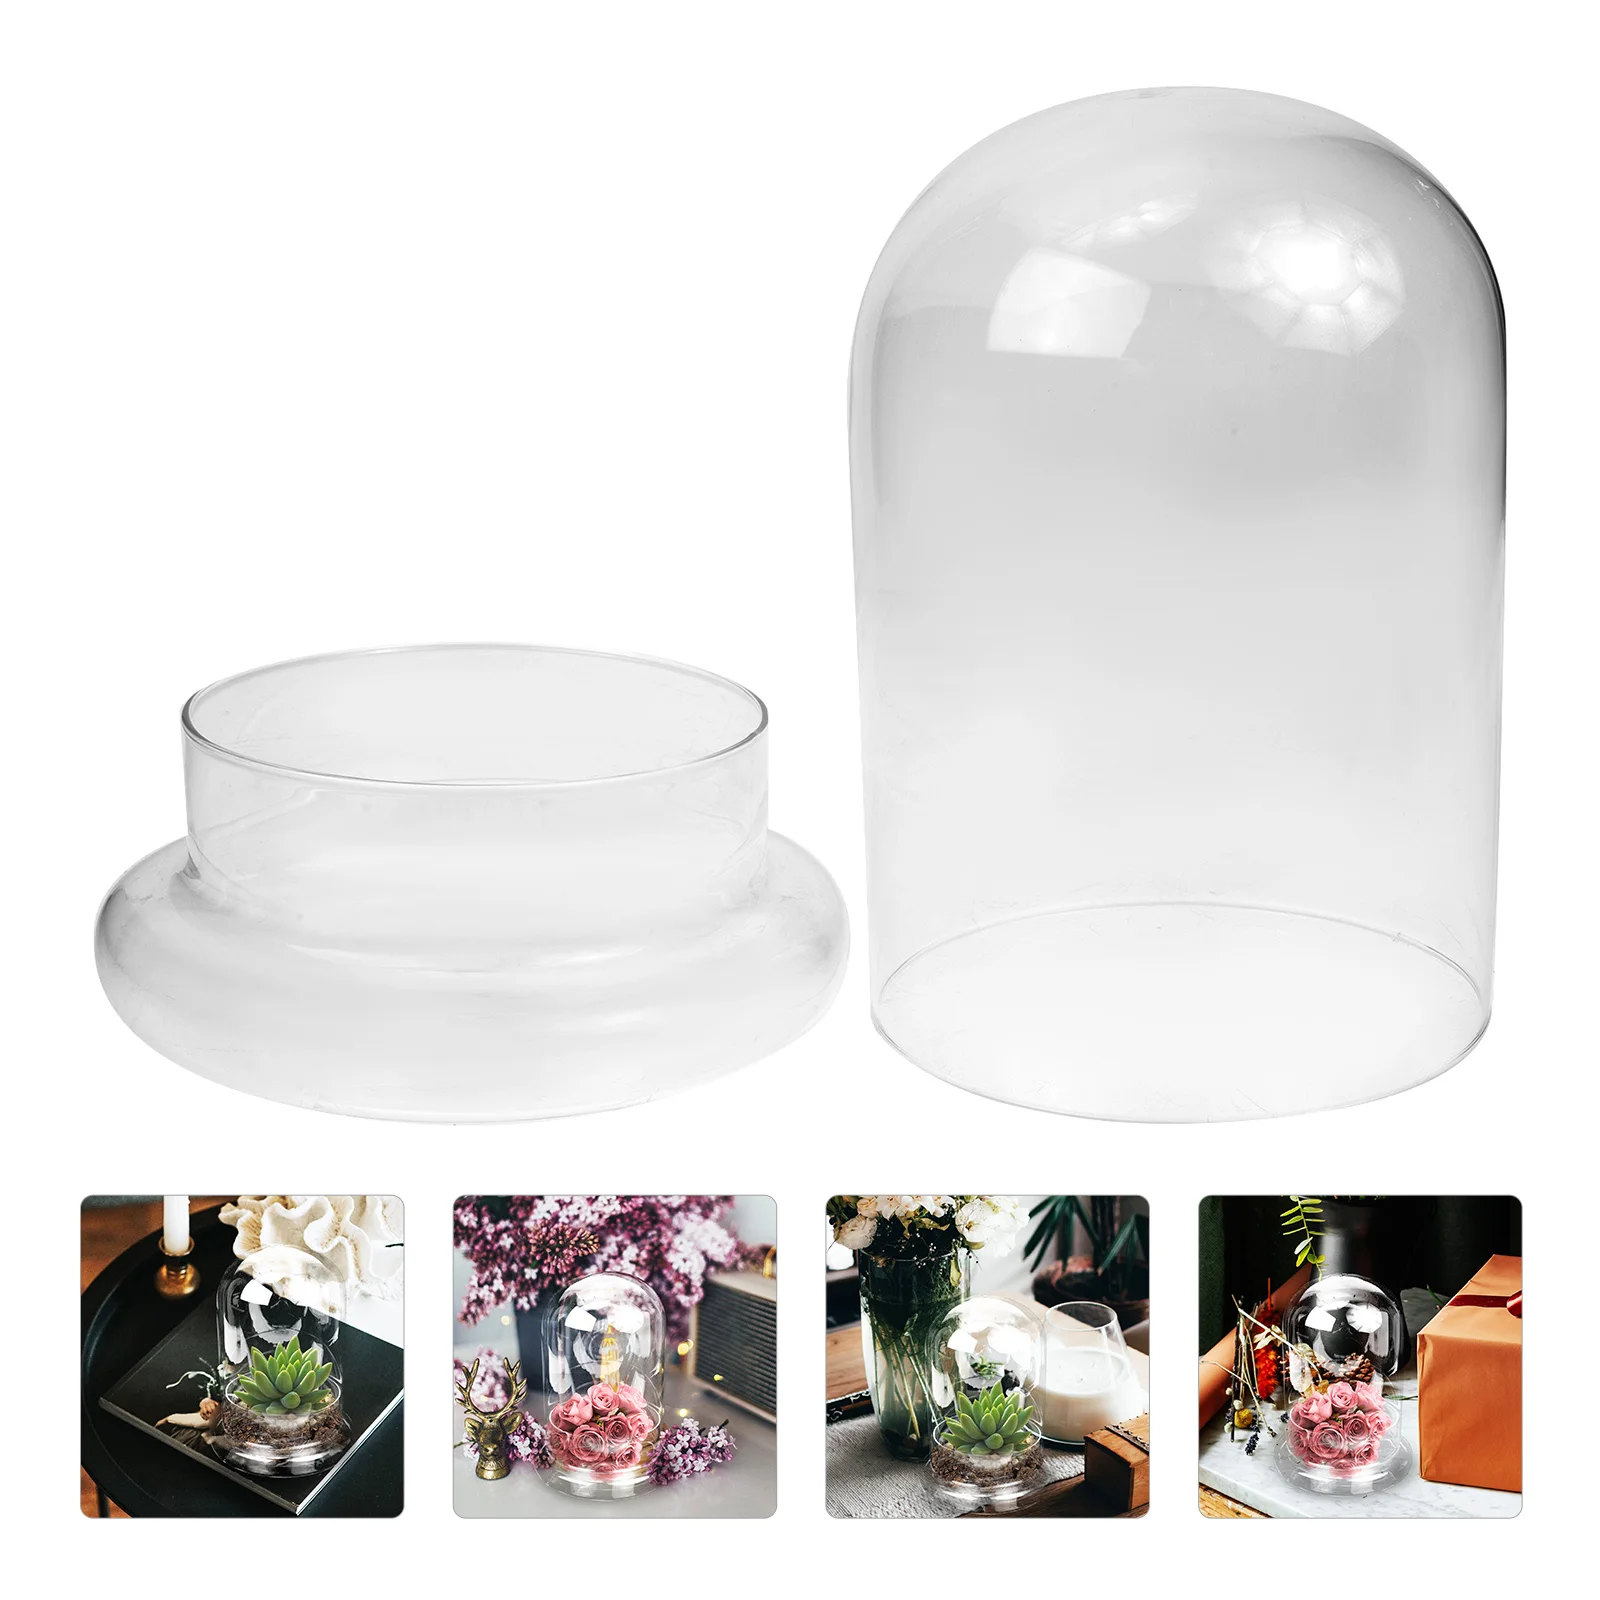 

Tabletop Centerpiece Cloche Jar Glass Flower Cover Vases Decorative Display Container Bell Dome Cupcake